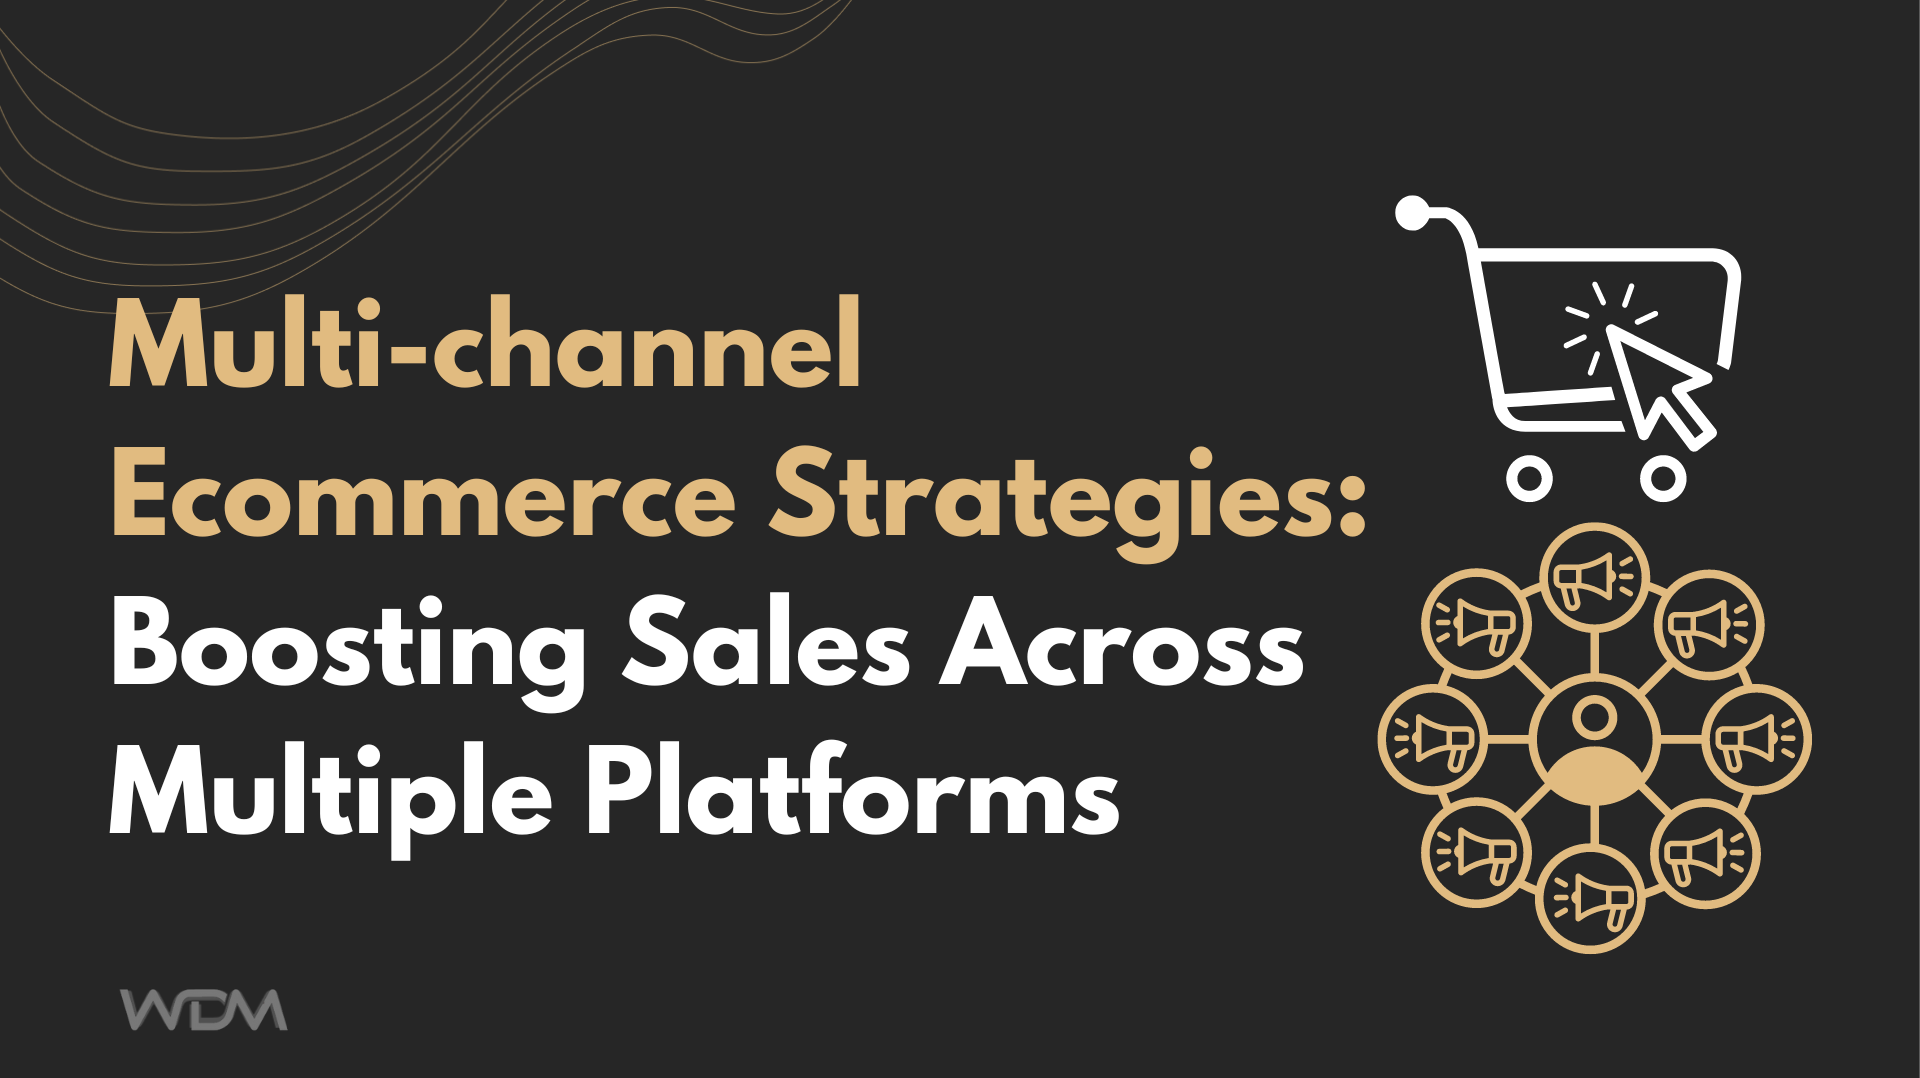 Multi-channel Ecommerce